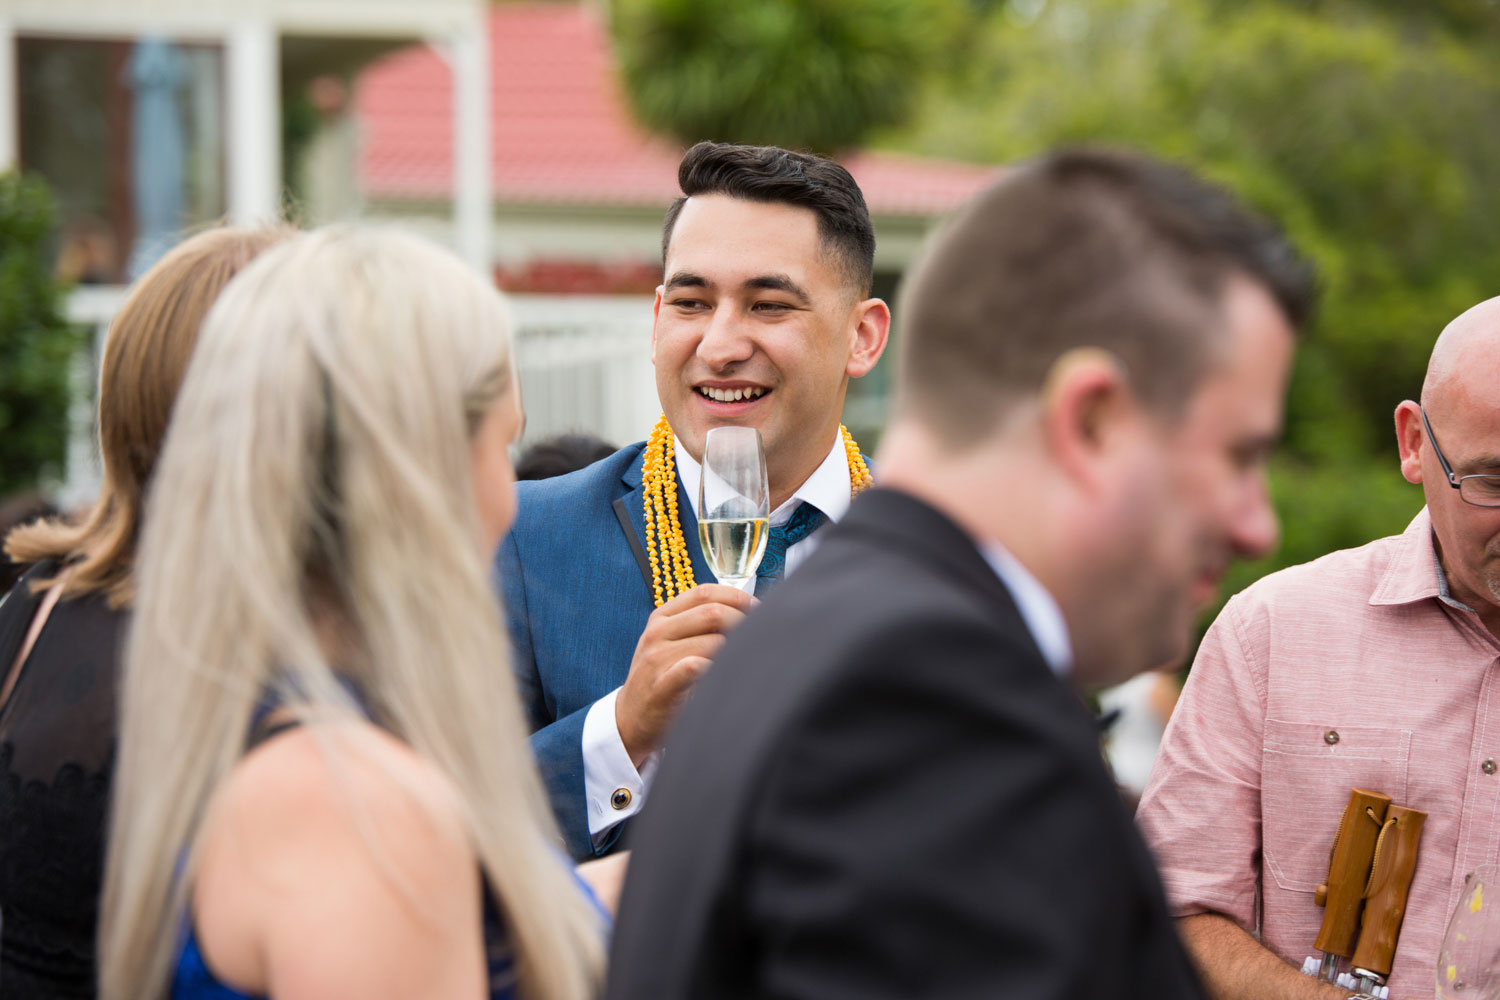 gracehill auckland wedding groom mingling with guests